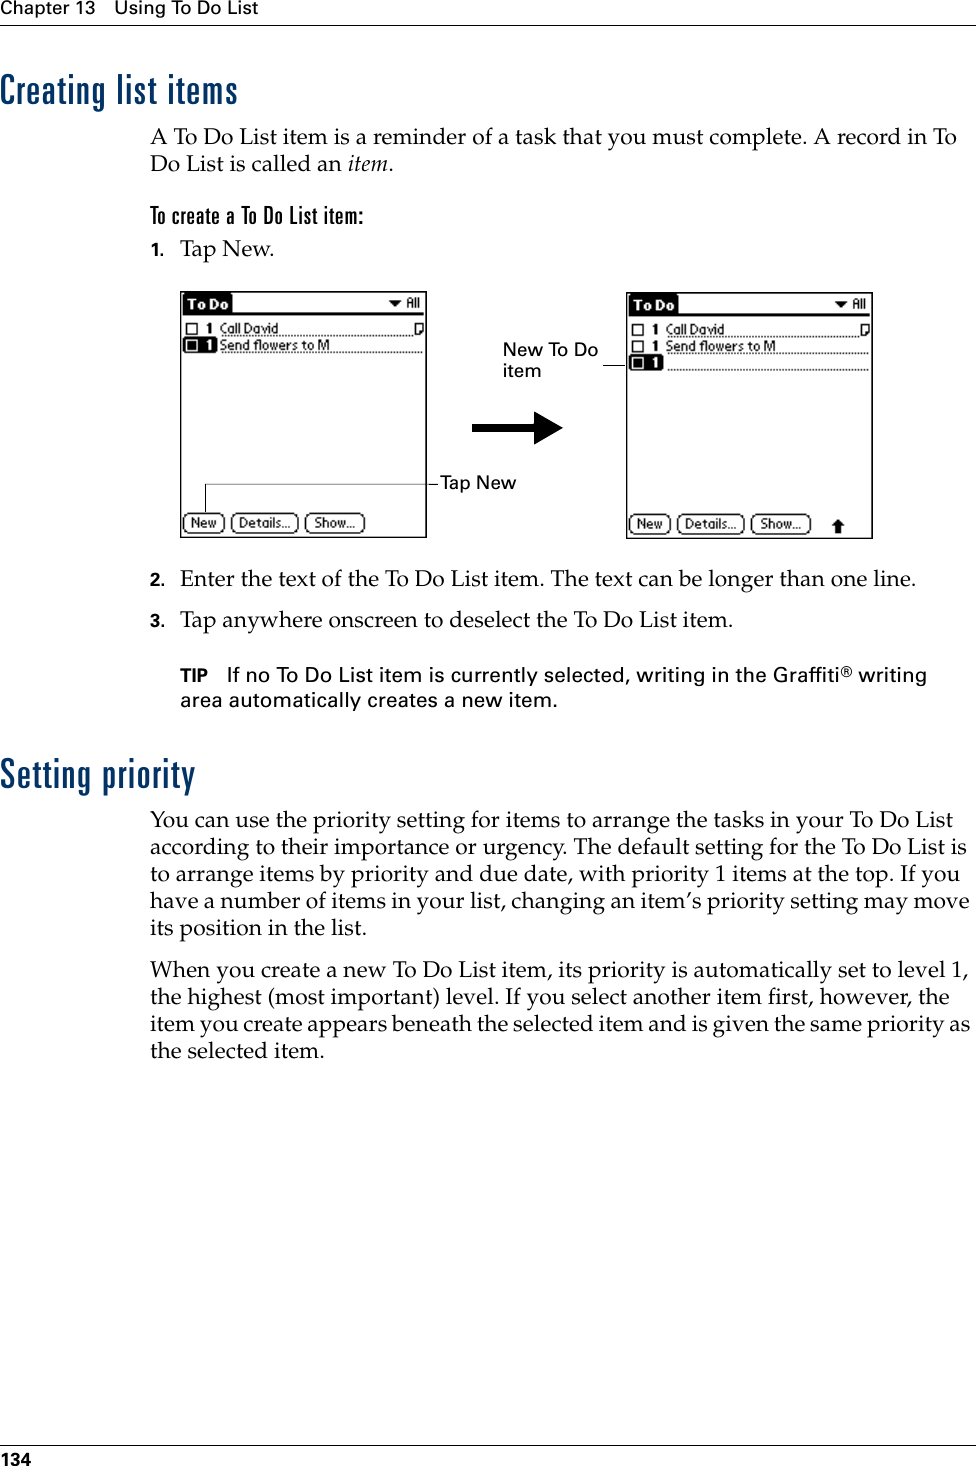 Chapter 13 Using To Do List134Creating list itemsA To Do List item is a reminder of a task that you must complete. A record in To Do List is called an item.To create a To Do List item:1. Tap N ew.2. Enter the text of the To Do List item. The text can be longer than one line.3. Tap anywhere onscreen to deselect the To Do List item.TIP If no To Do List item is currently selected, writing in the Graffiti® writing area automatically creates a new item.Setting priorityYou can use the priority setting for items to arrange the tasks in your To Do List according to their importance or urgency. The default setting for the To Do List is to arrange items by priority and due date, with priority 1 items at the top. If you have a number of items in your list, changing an item’s priority setting may move its position in the list. When you create a new To Do List item, its priority is automatically set to level 1, the highest (most important) level. If you select another item first, however, the item you create appears beneath the selected item and is given the same priority as the selected item. Ta p  N e wNew To Do itemPalm, Inc. Confidential